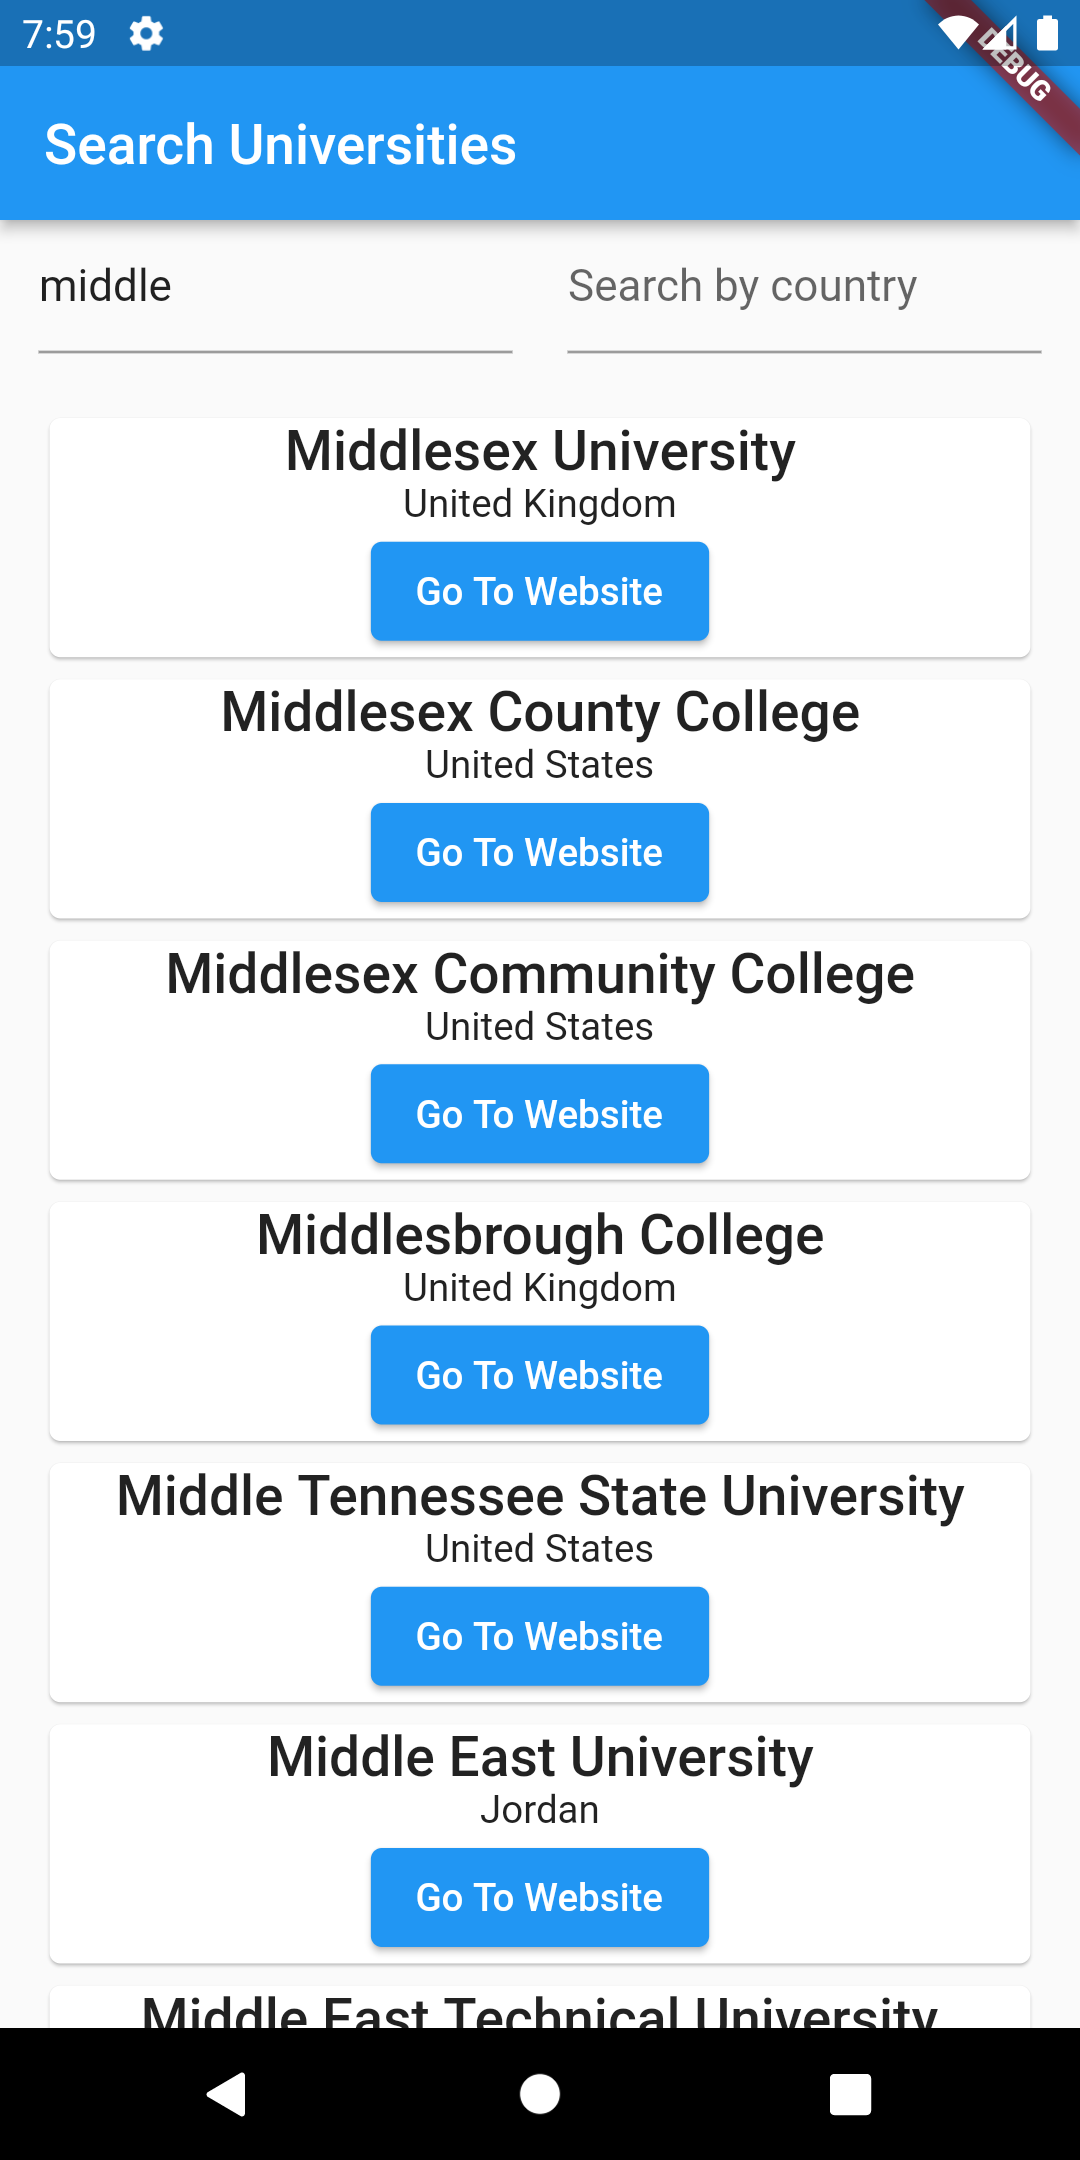 A Flutter mobile and web application that allows you to search for universities worldwide by name and country